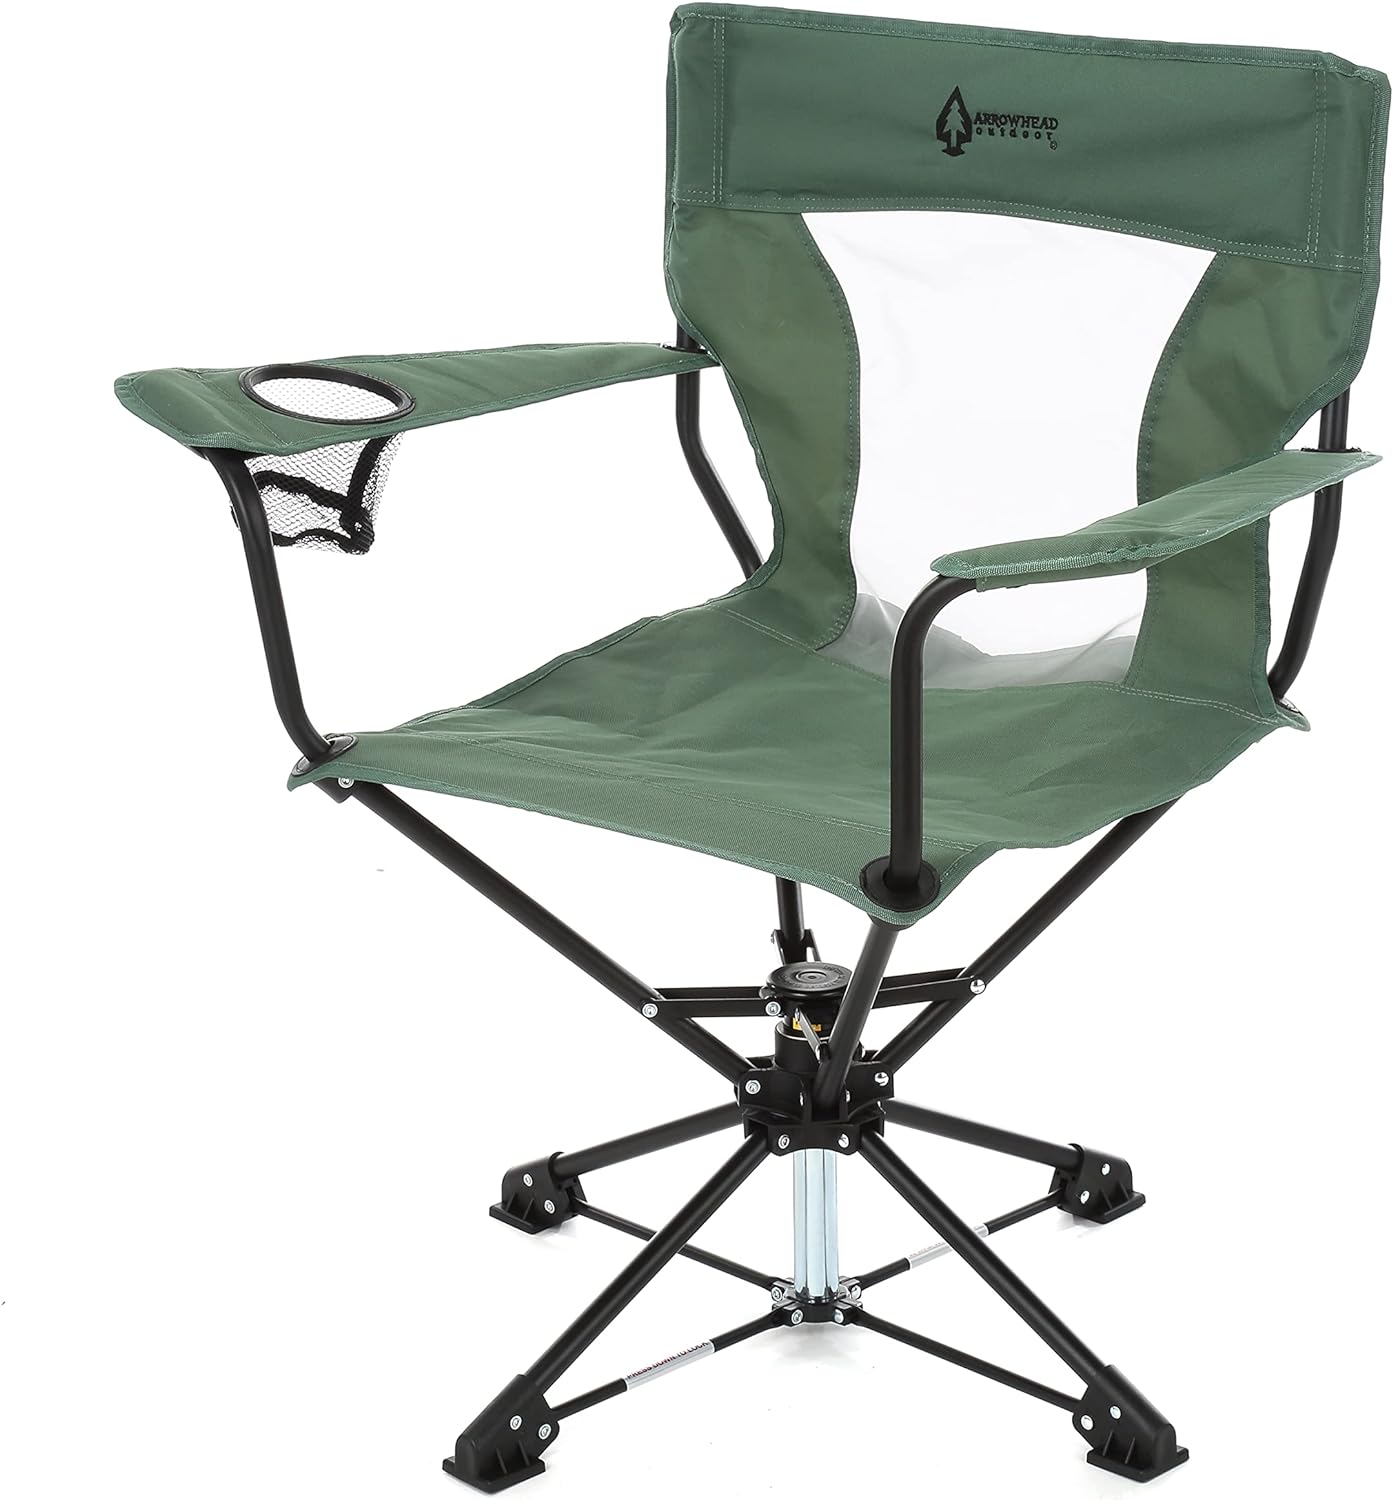 360° Degree Swivel Hunting Chair with Armrests